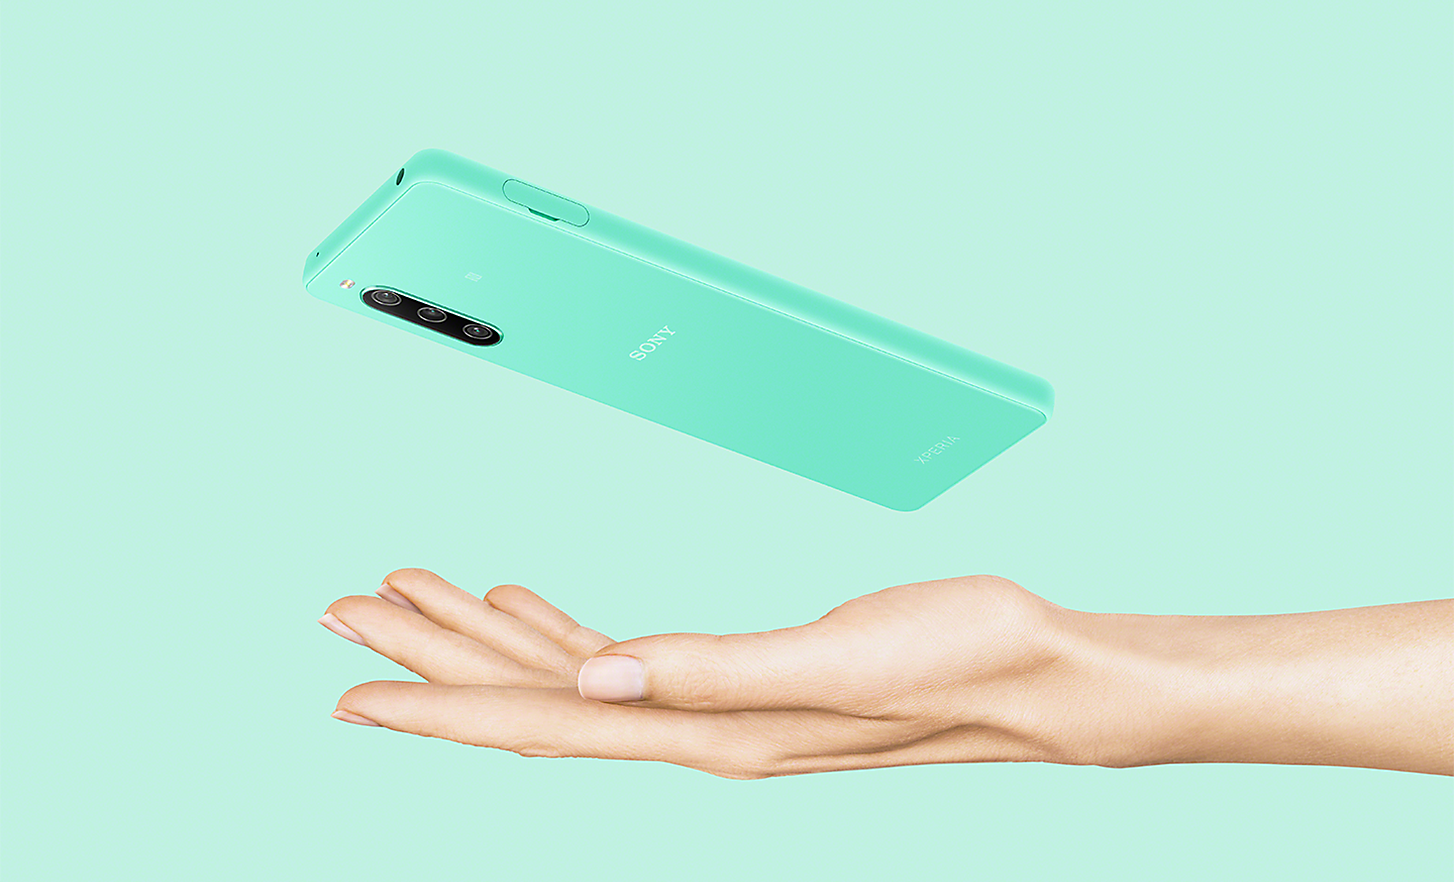 An Xperia 10 IV in mint above an outstretched hand